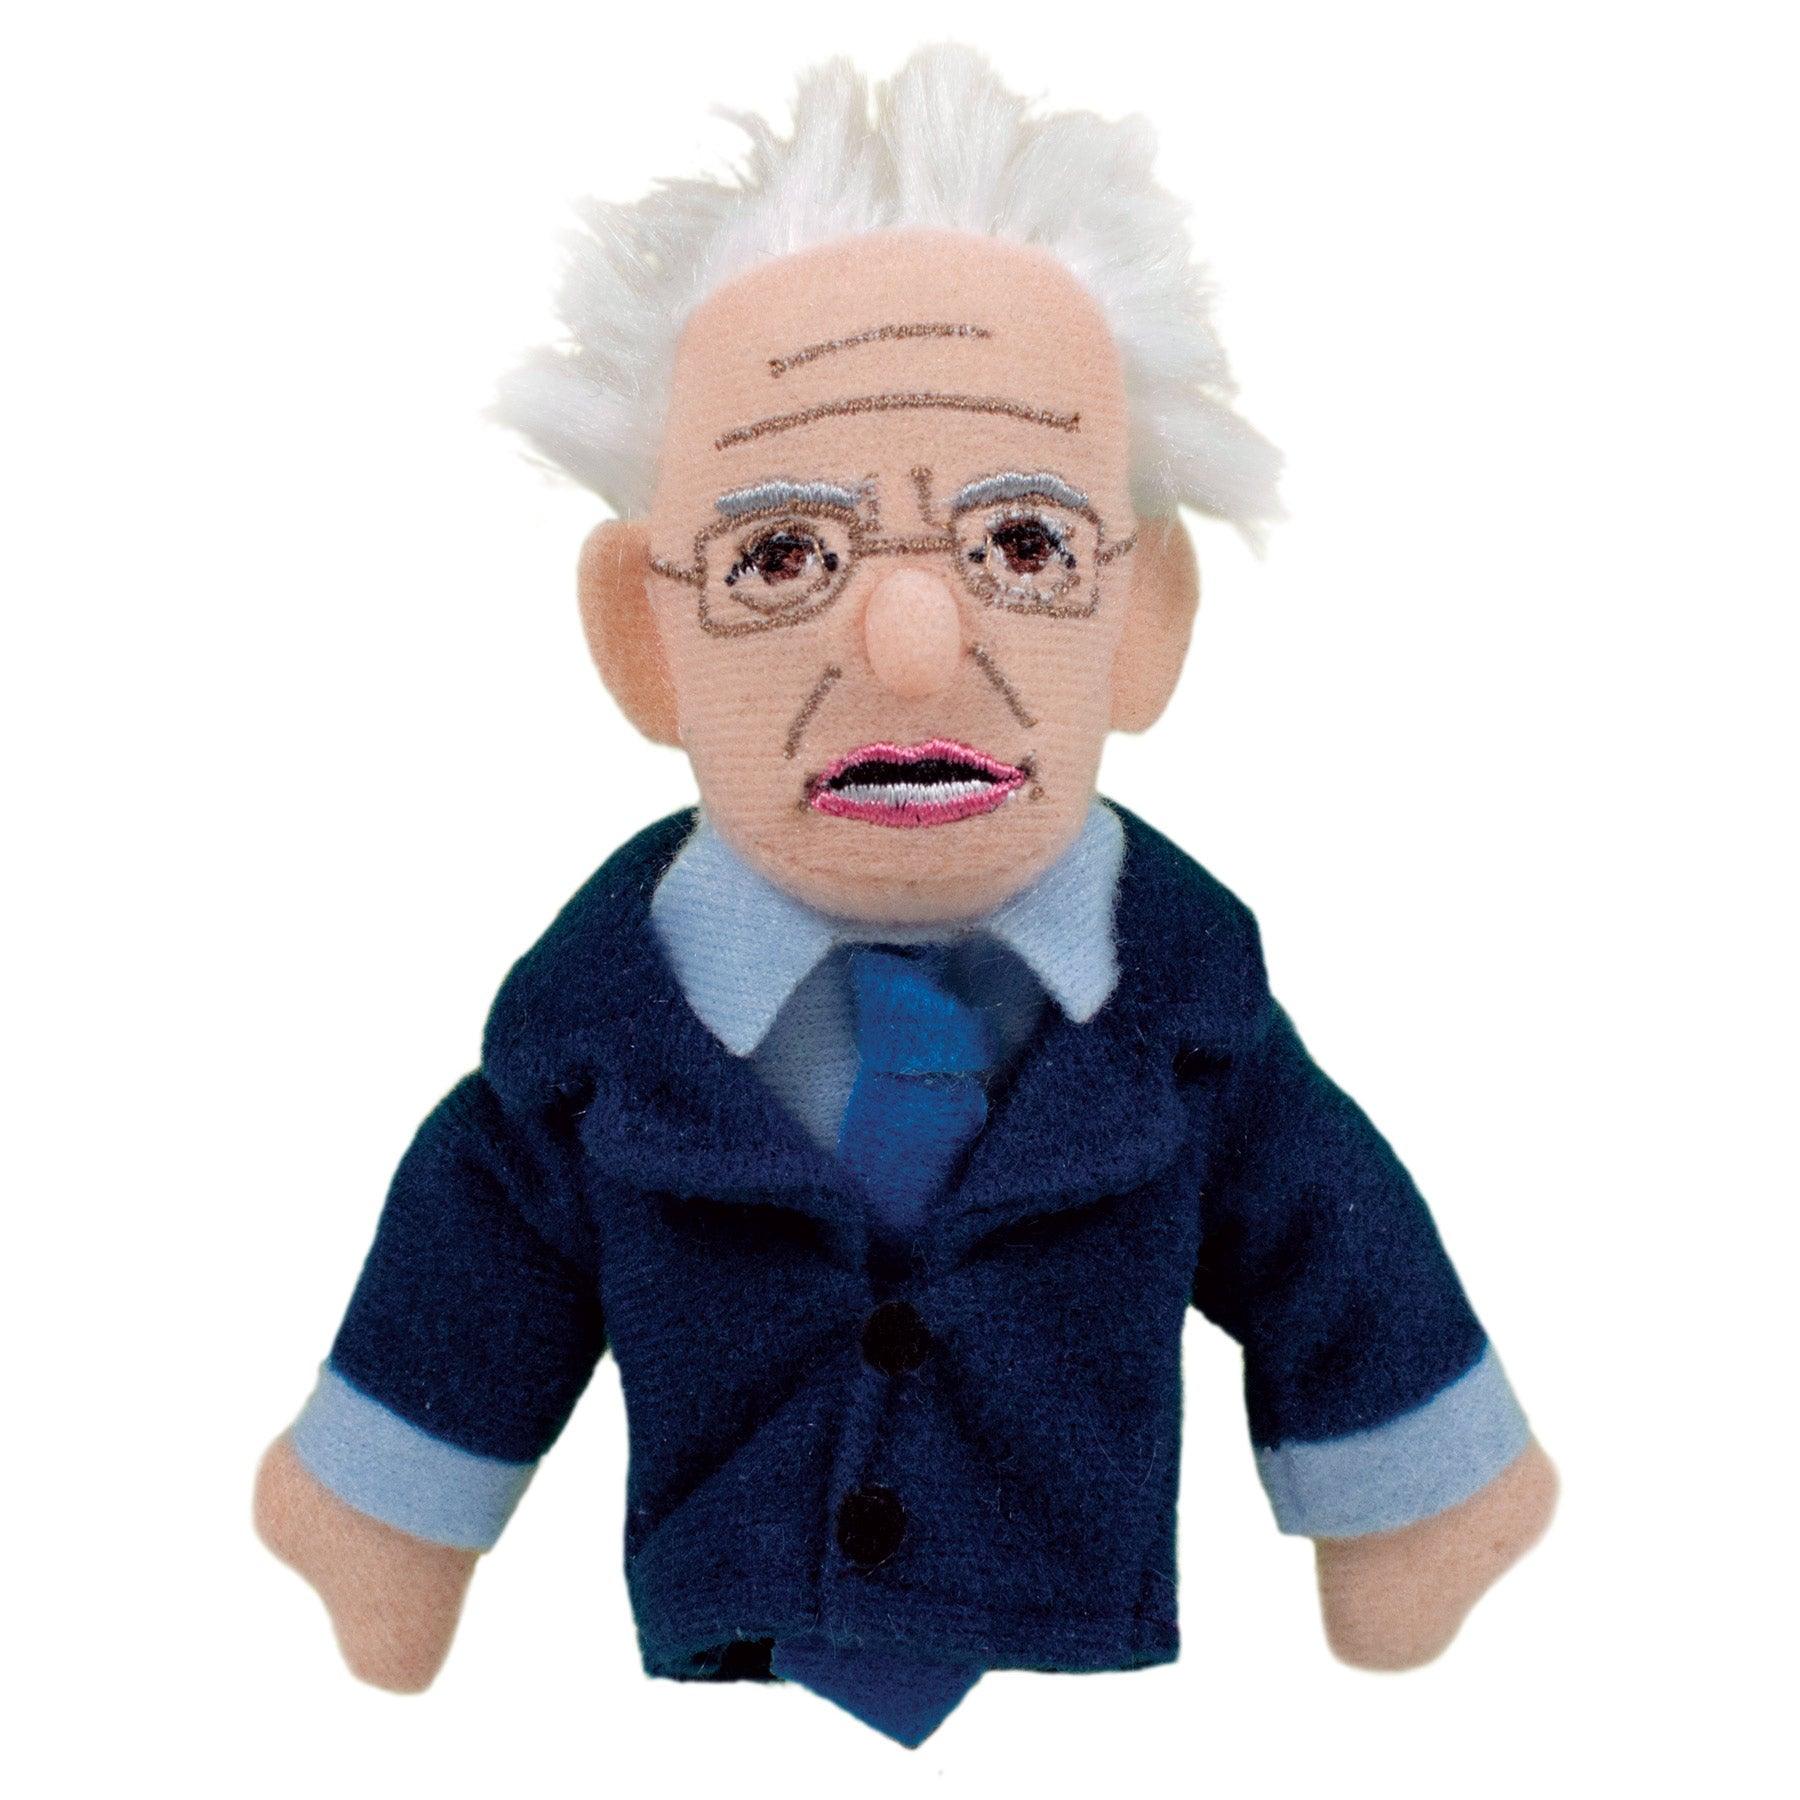 Product photo of Bernie Sanders Finger Puppet, a novelty gift manufactured by The Unemployed Philosophers Guild.